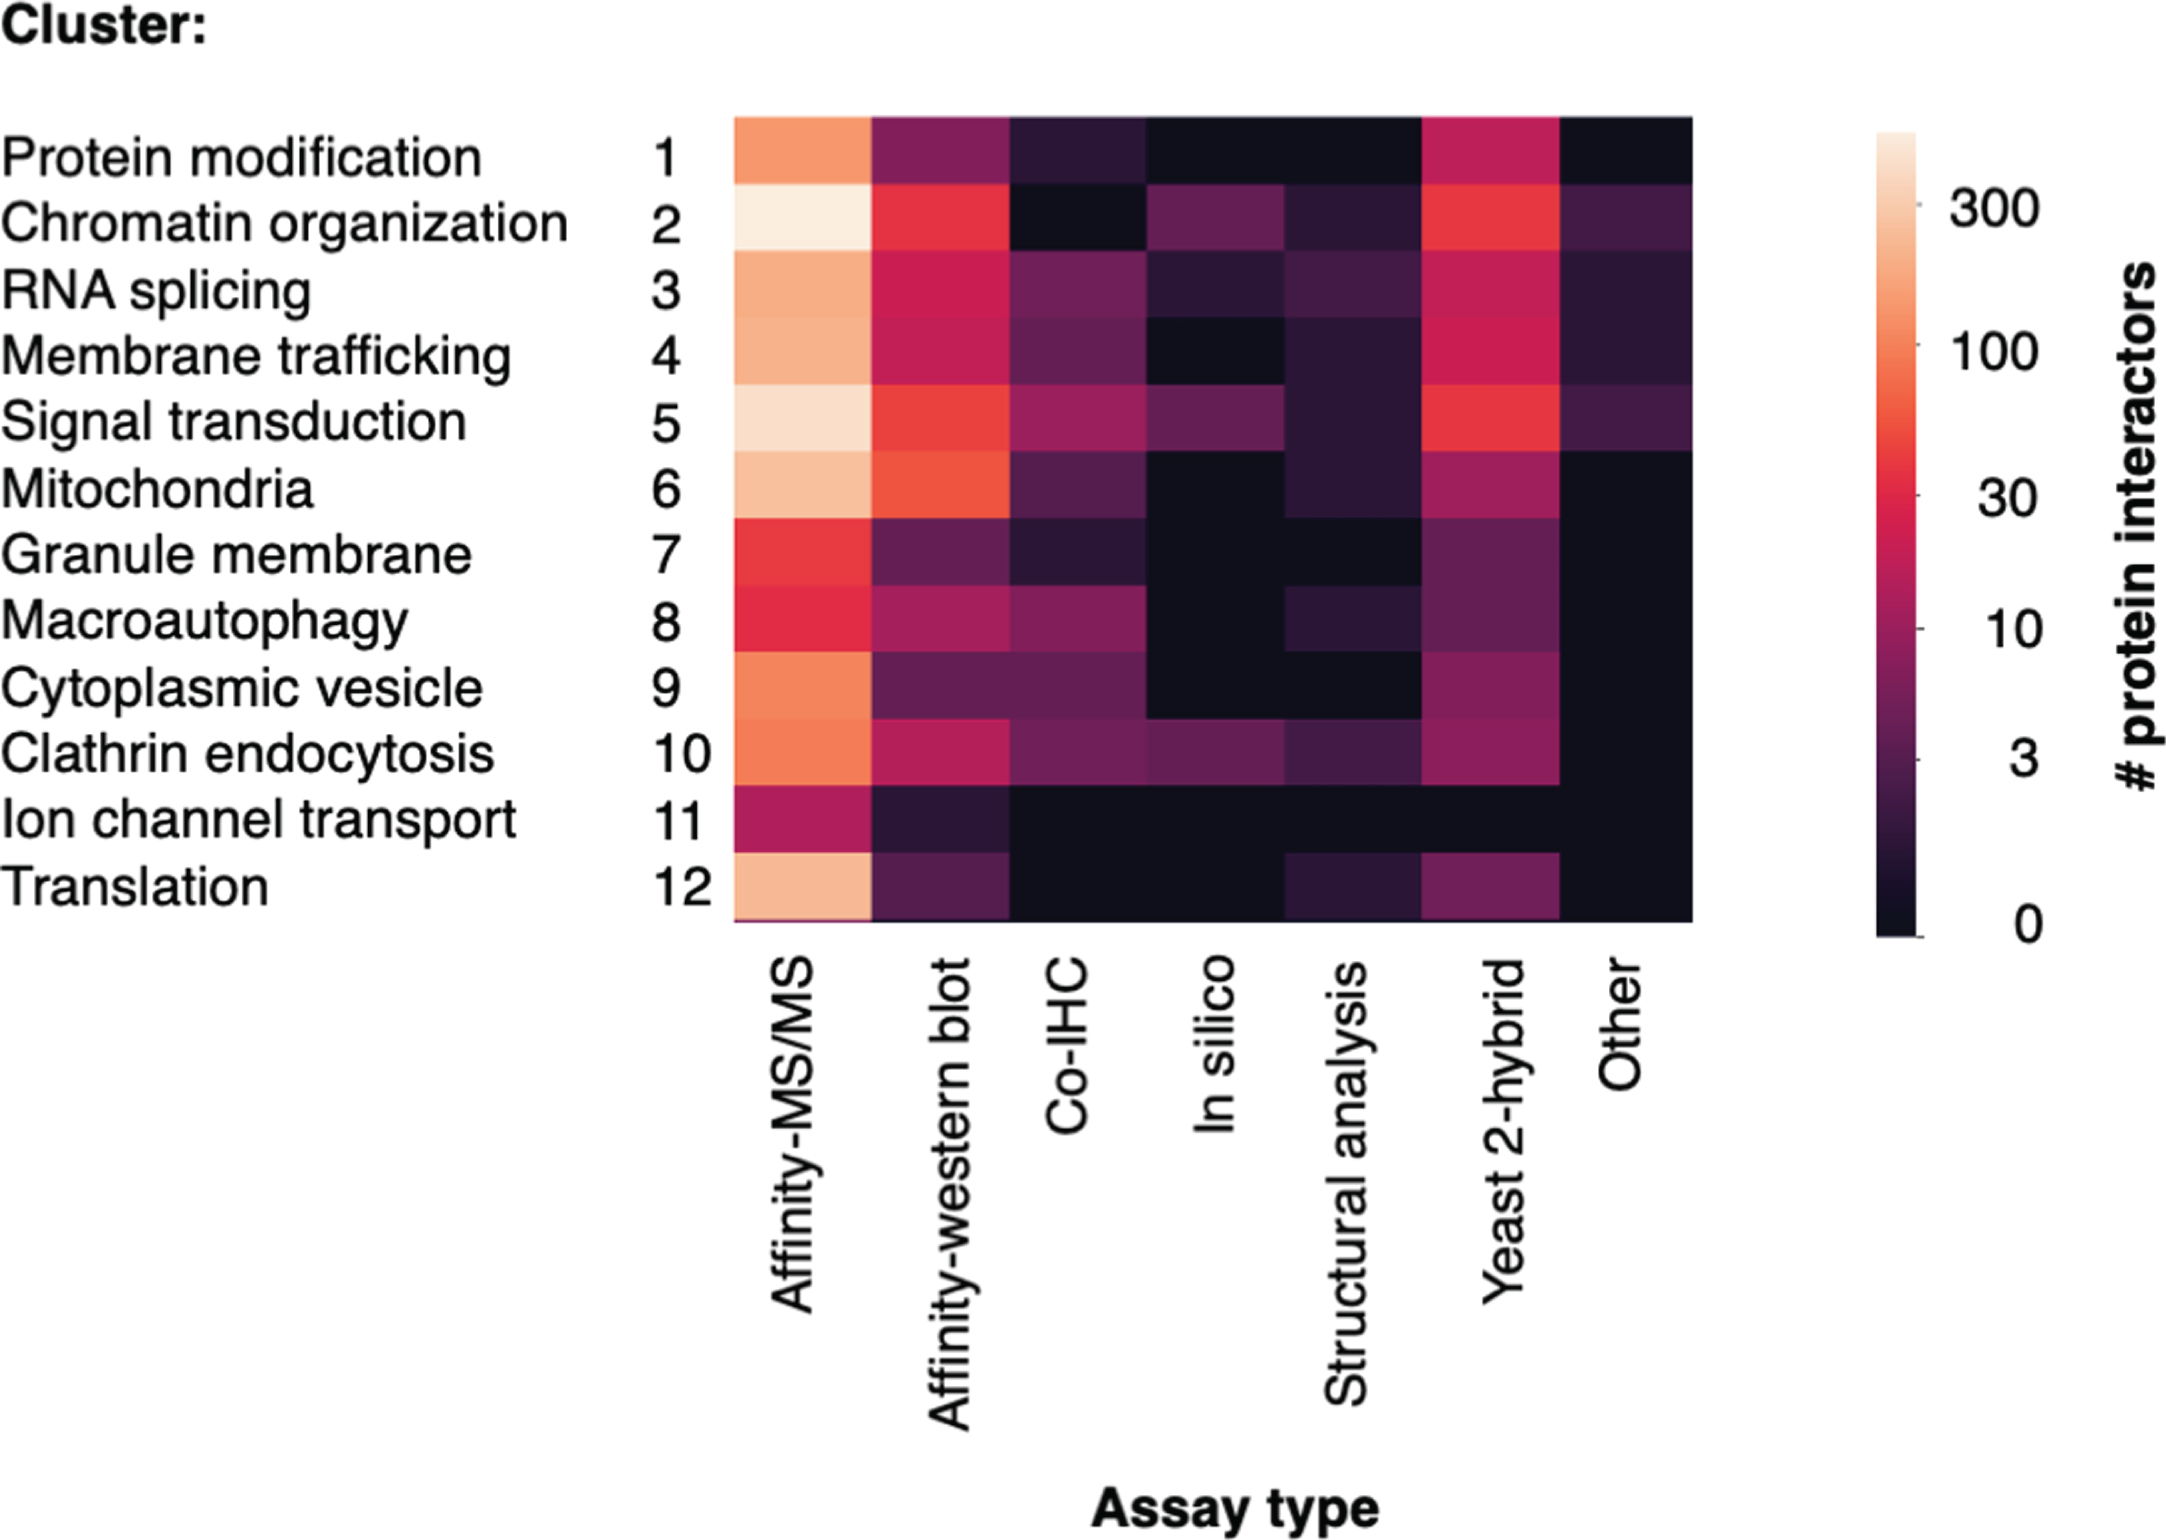 Number of Htt interactors identified by assay type for each cluster. The identification of Htt interactors within each cluster by the type of experimental assay is illustrated. The number of interactors determined according to assay types are color-coded (see key).